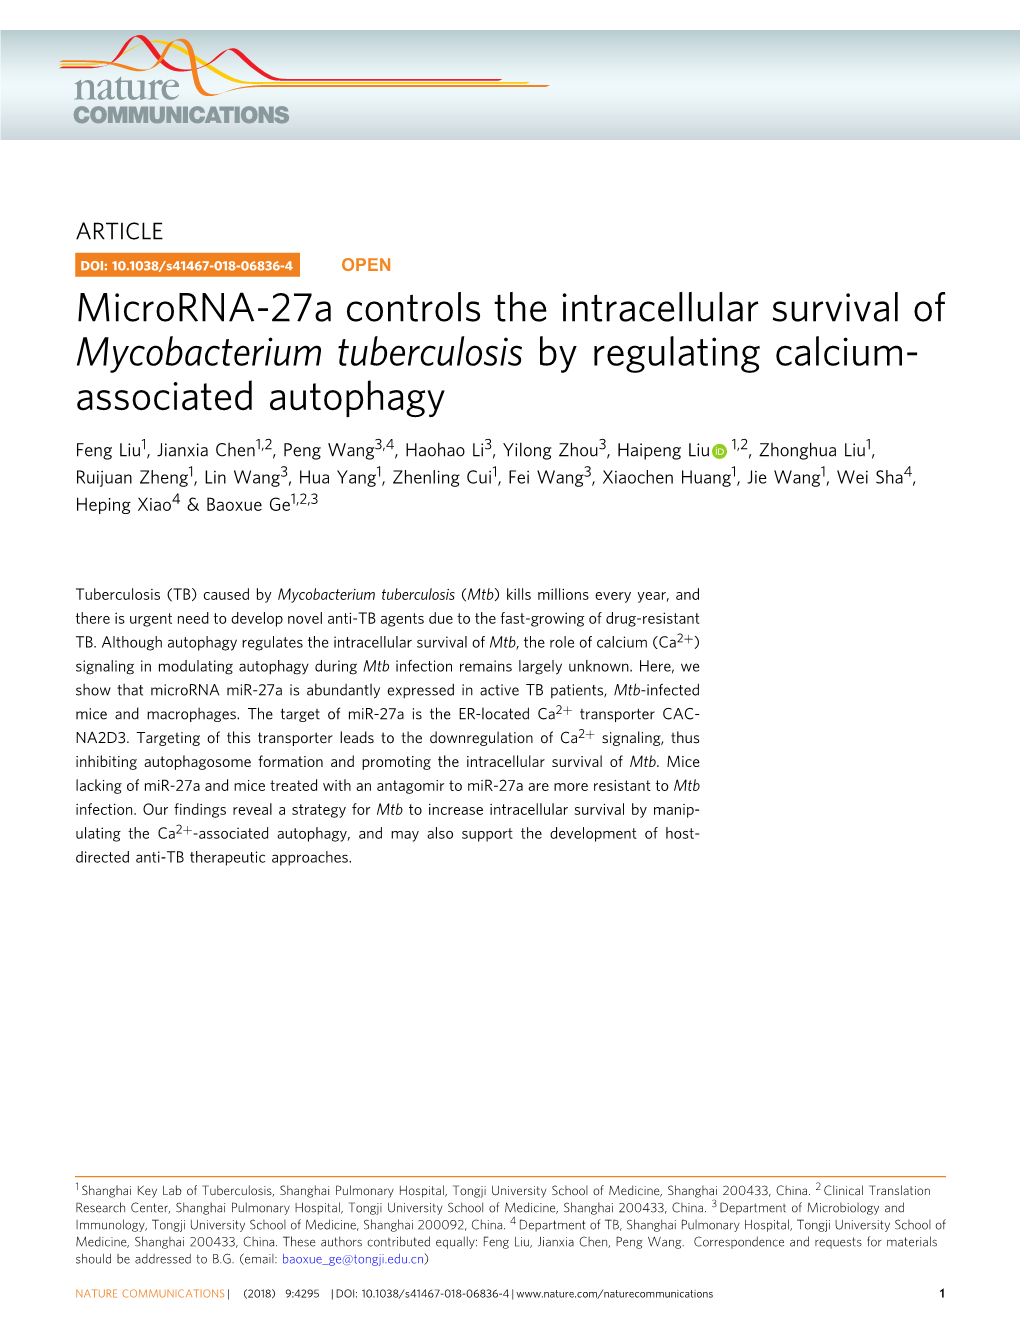 Microrna-27A Controls the Intracellular Survival of Mycobacterium Tuberculosis by Regulating Calcium- Associated Autophagy